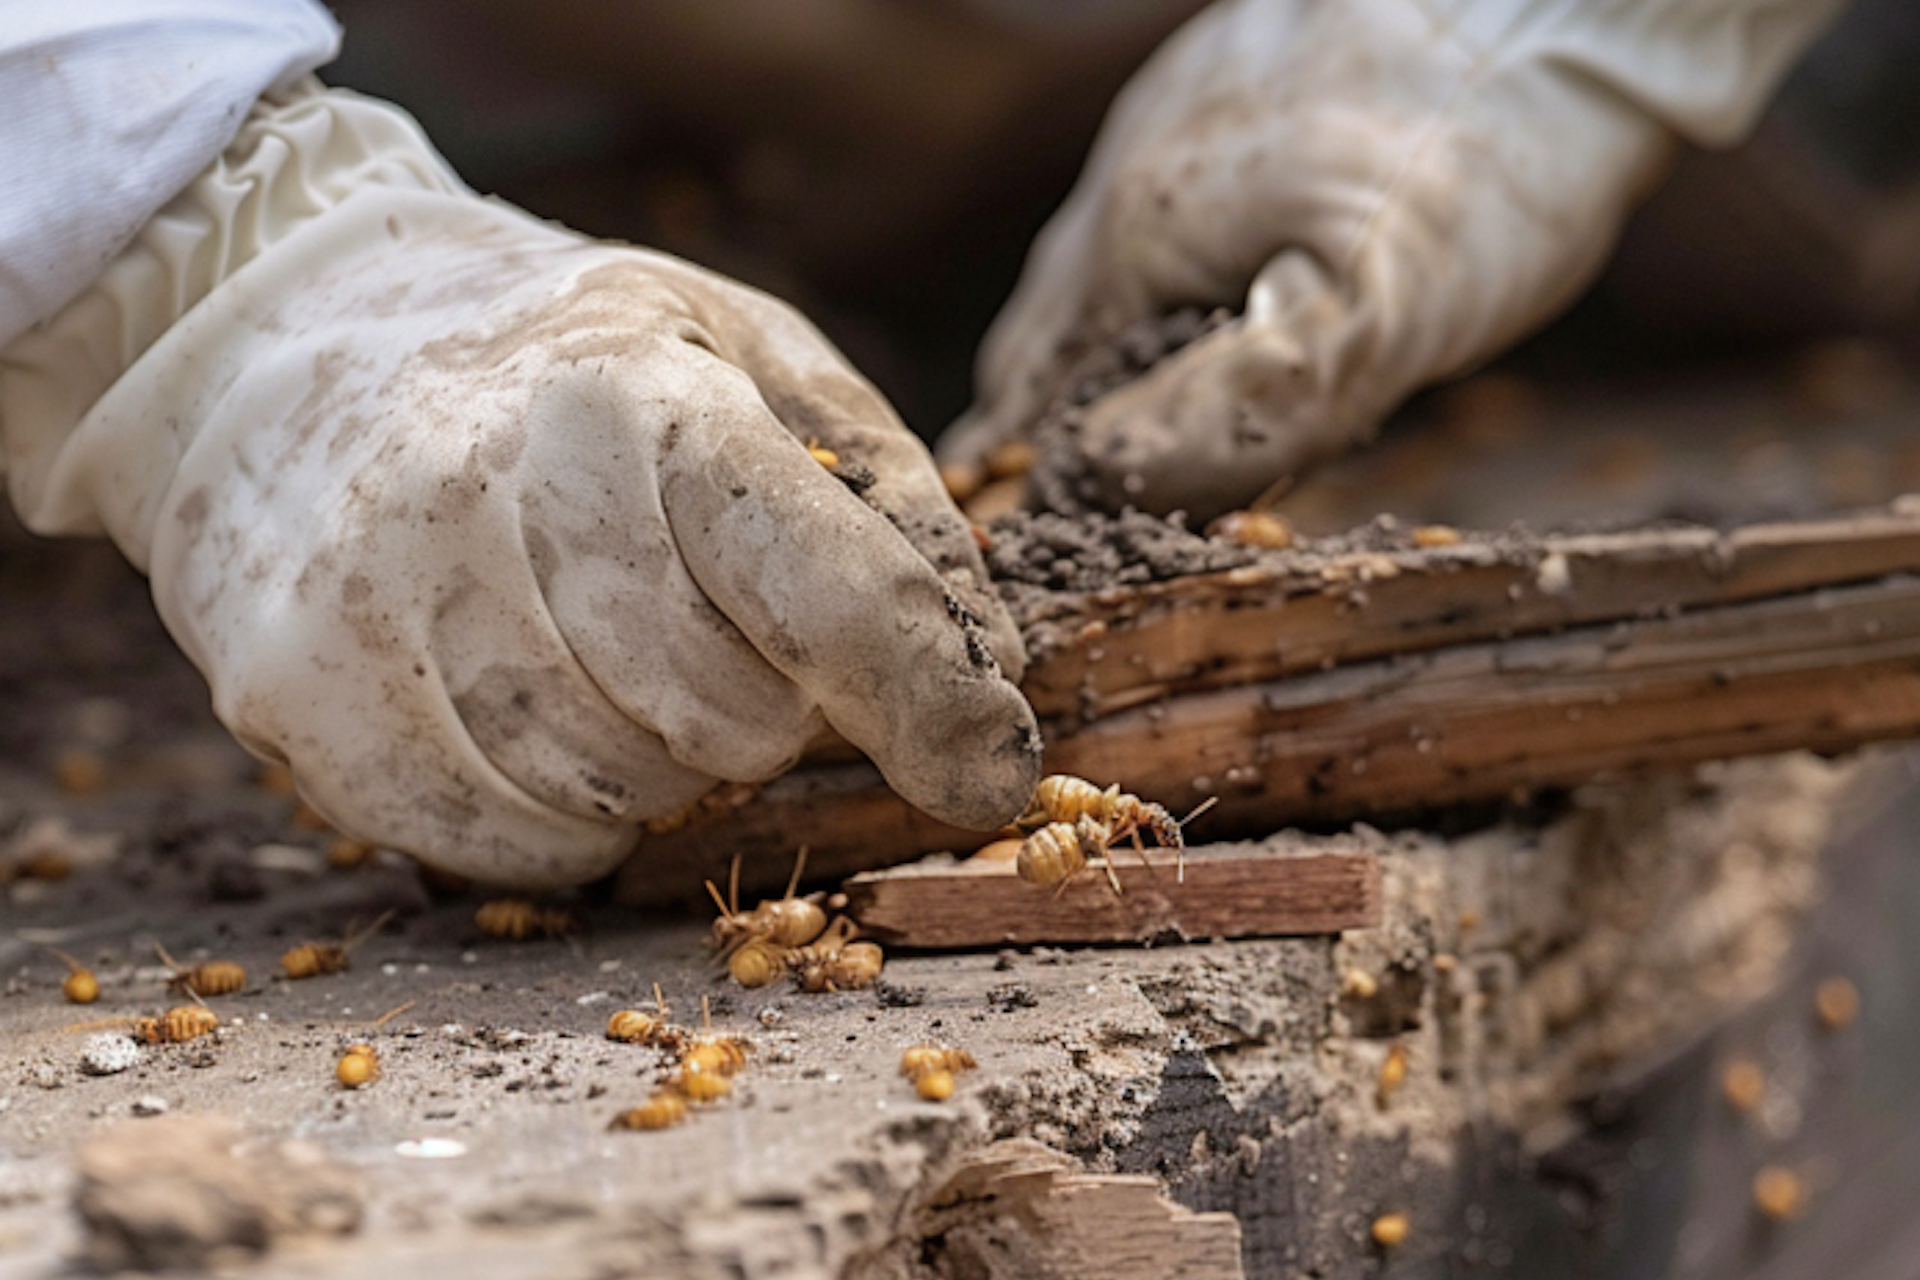 Termite inspections are the first step toward remedying any termite infestation